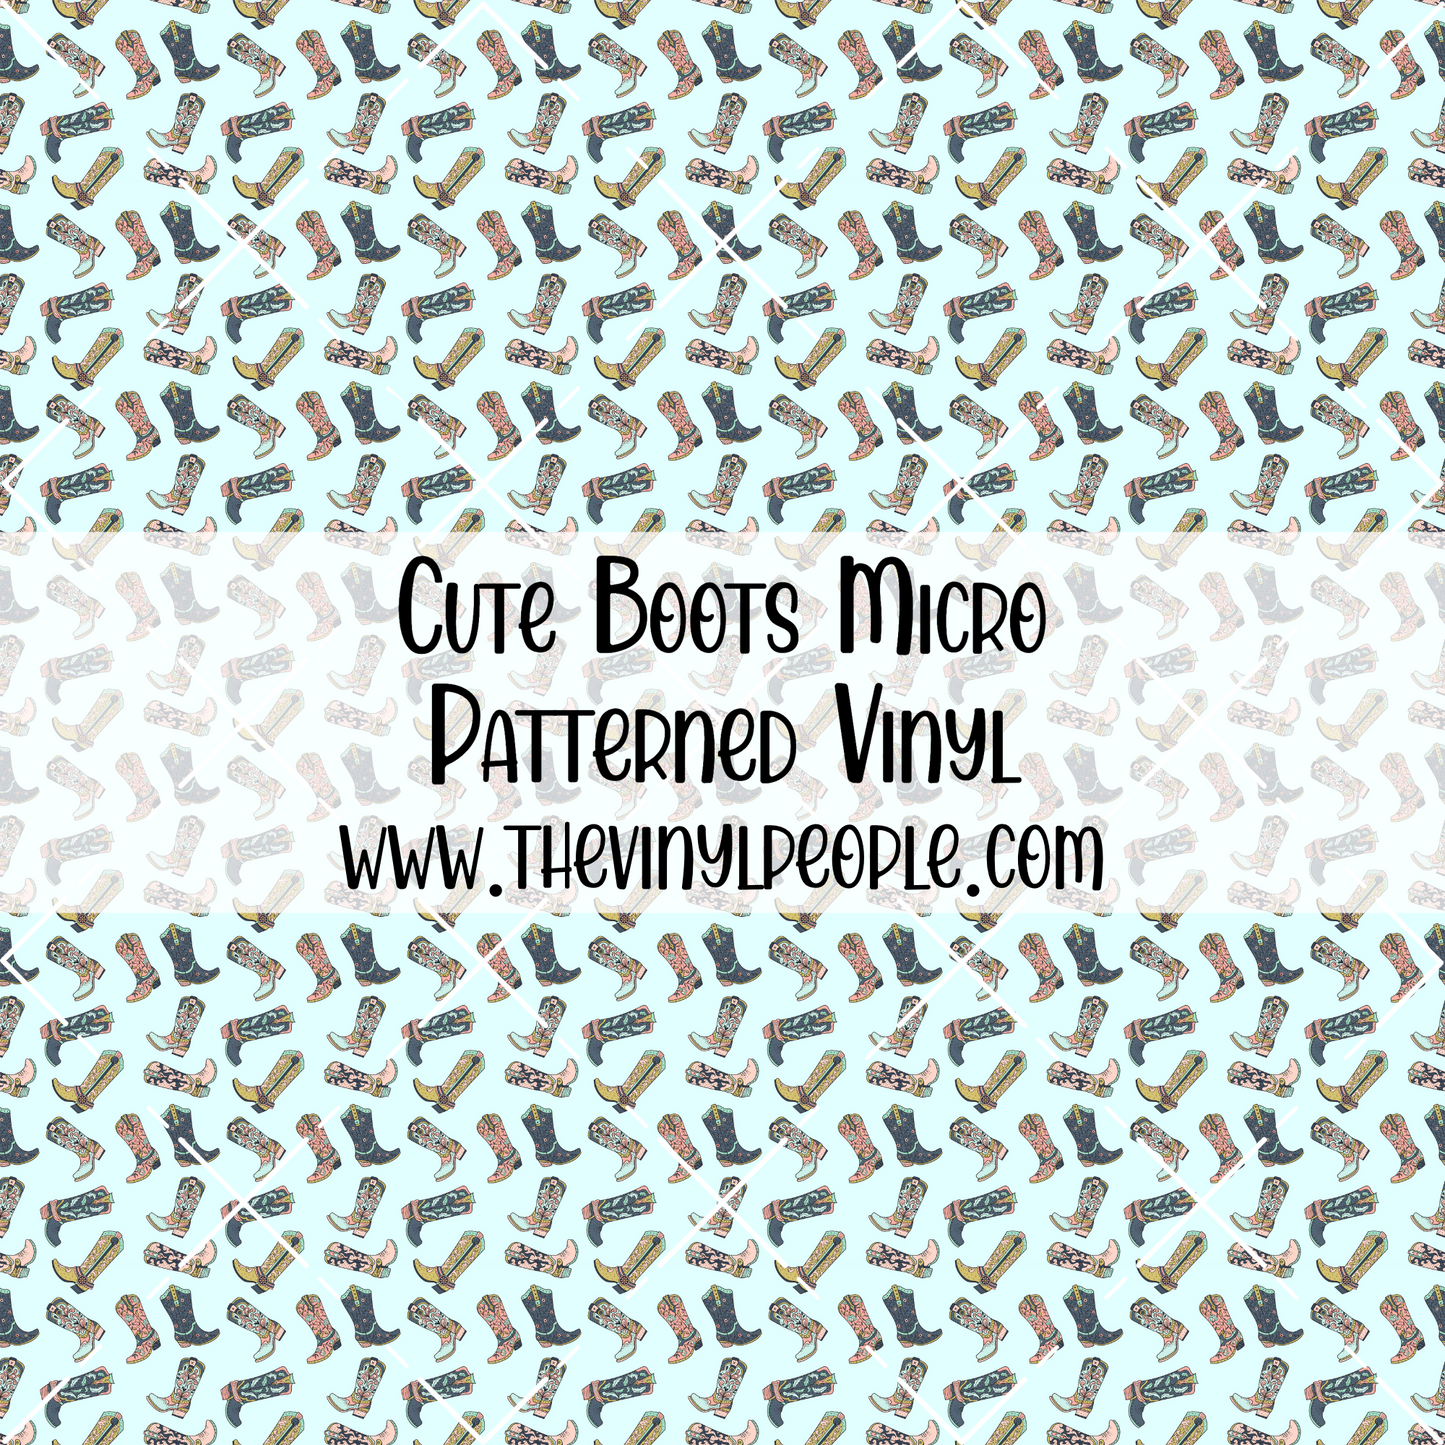 Cute Boots Patterned Vinyl